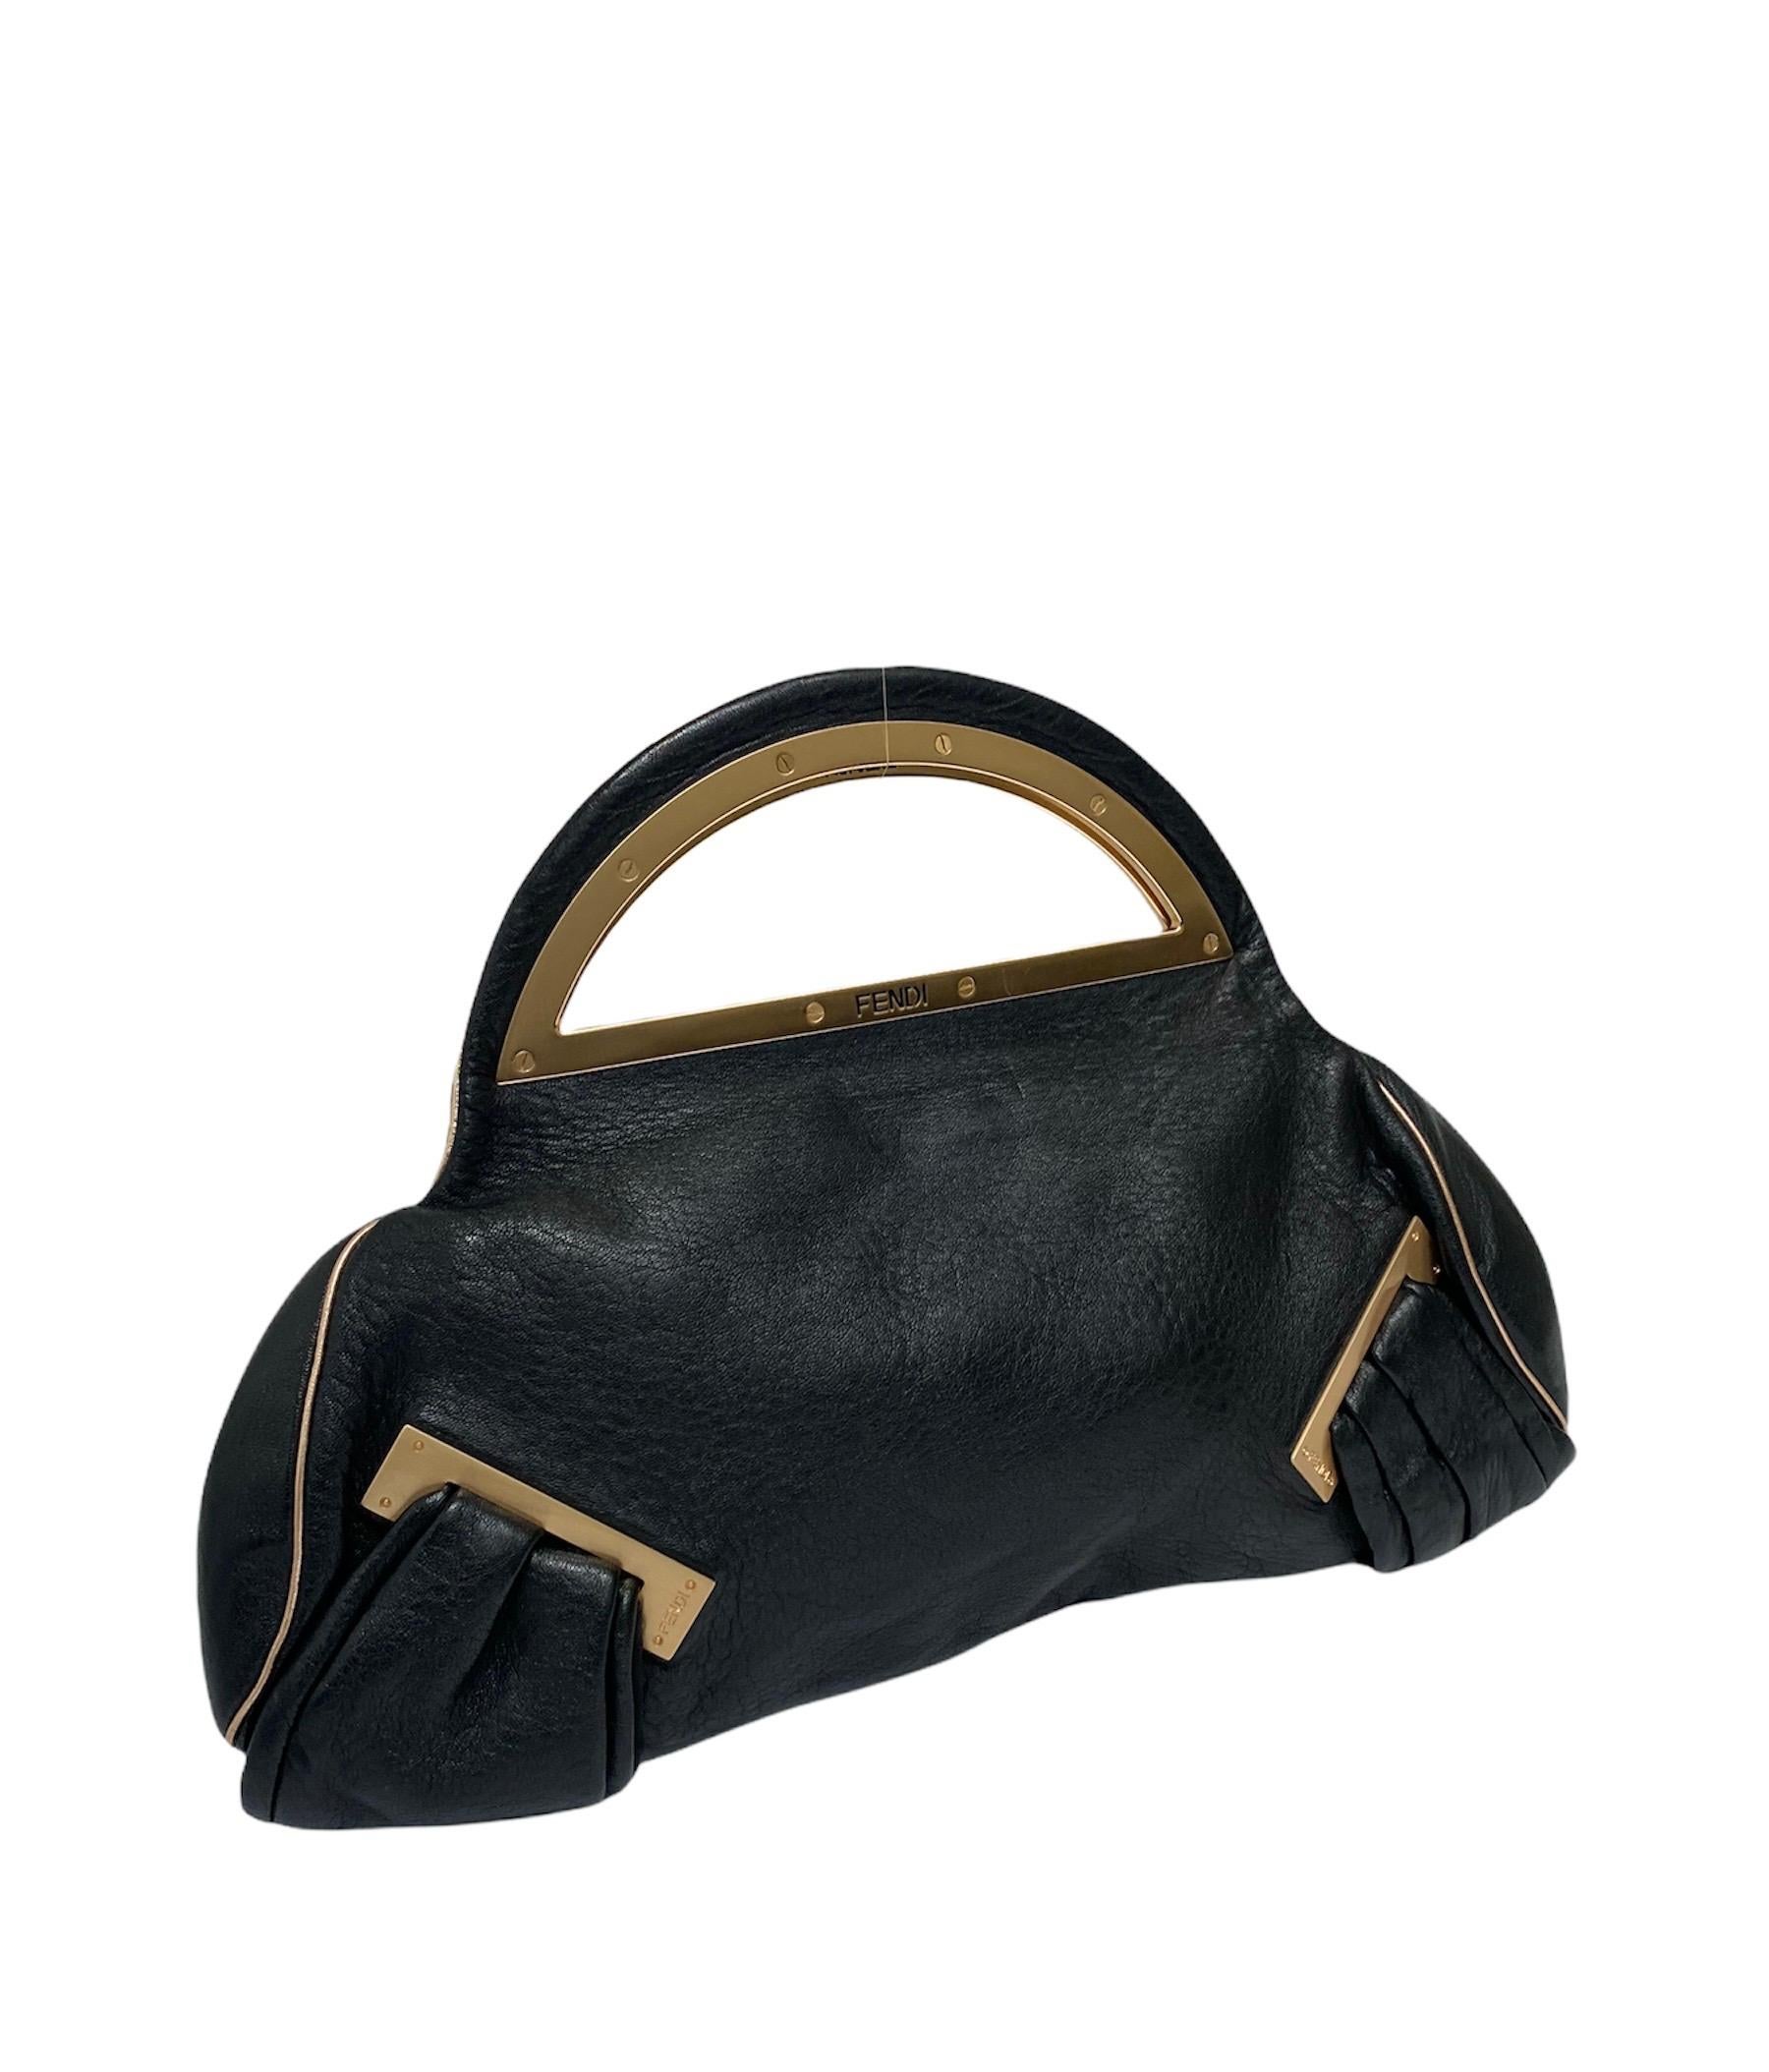 Fendi handbag made of a black leather with pink hardware. Zip closure, internally roomy for the essentials. Equipped with double leather and metal handle. It seems in perfect conditions.